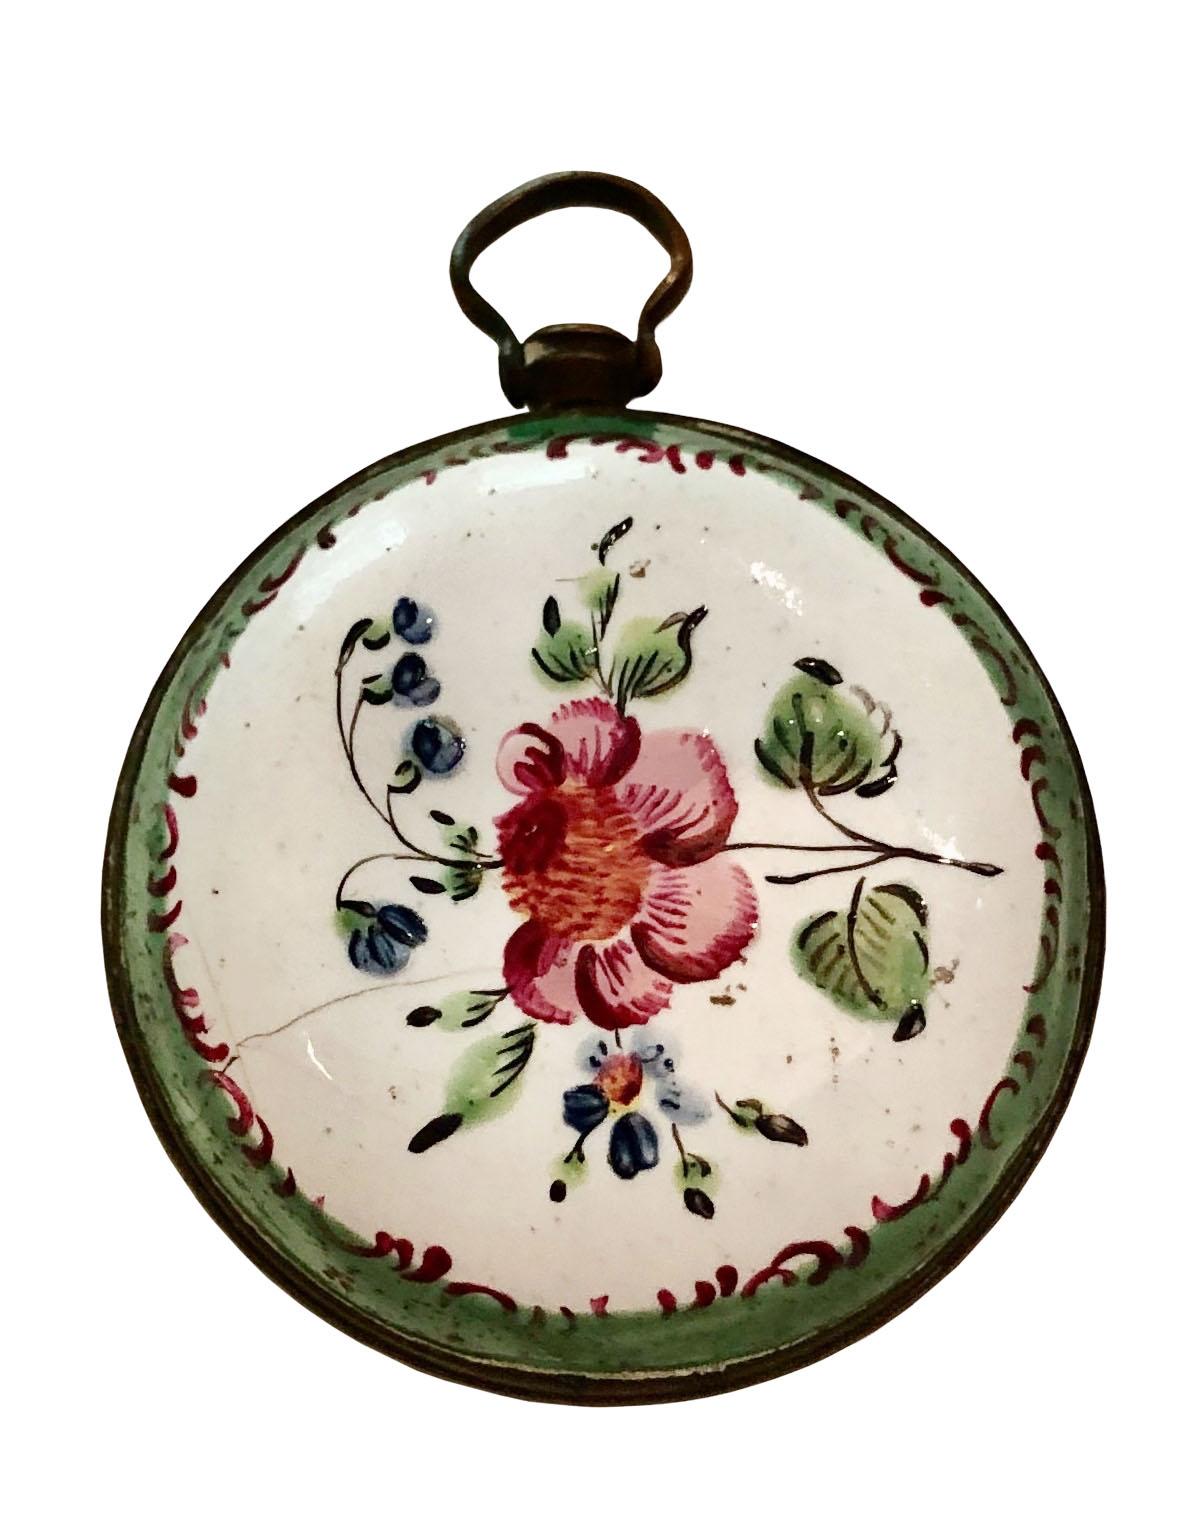 Antique English Battersea Locket in the Form of a Clock In Good Condition For Sale In Tampa, FL